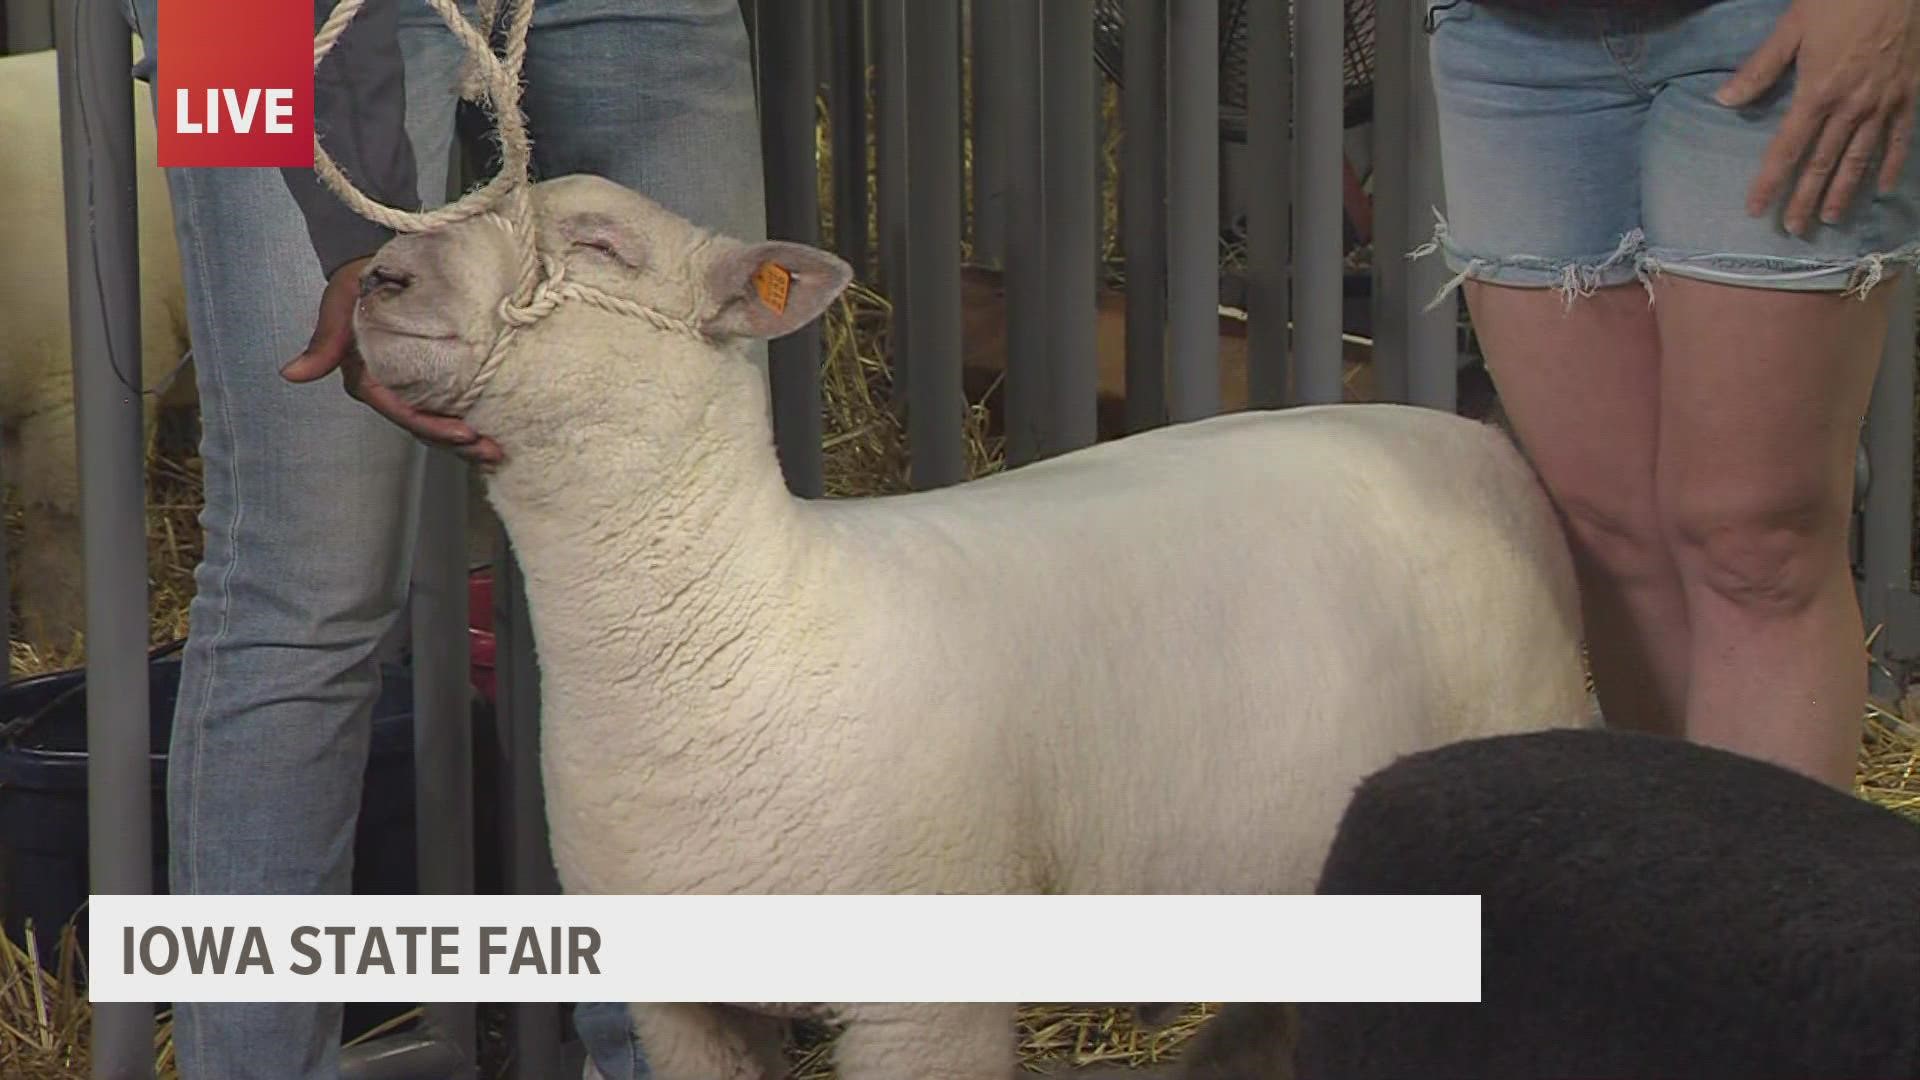 Live with babydoll sheep at the Iowa State Fair!